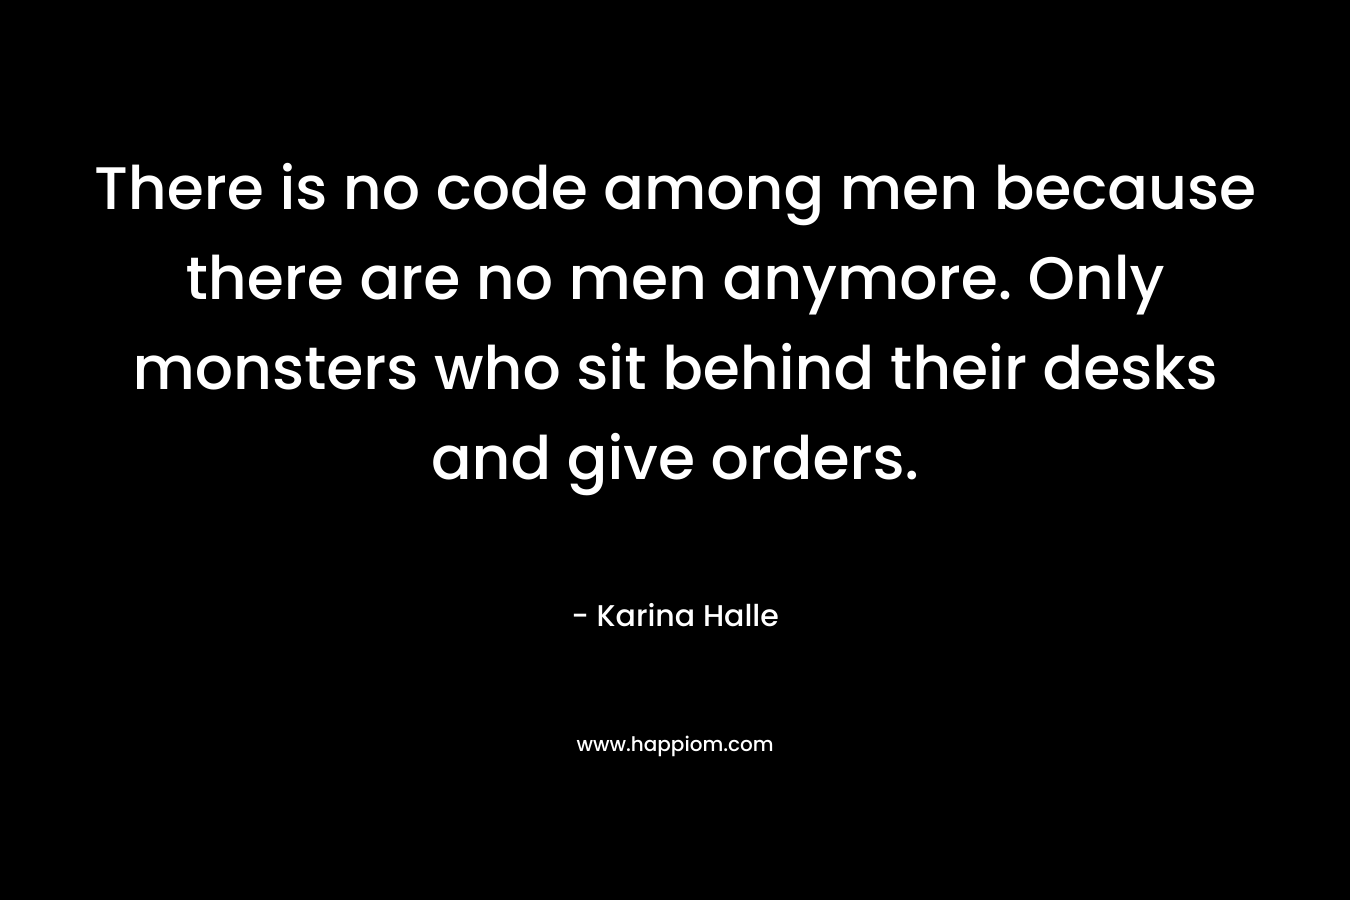 There is no code among men because there are no men anymore. Only monsters who sit behind their desks and give orders. – Karina Halle